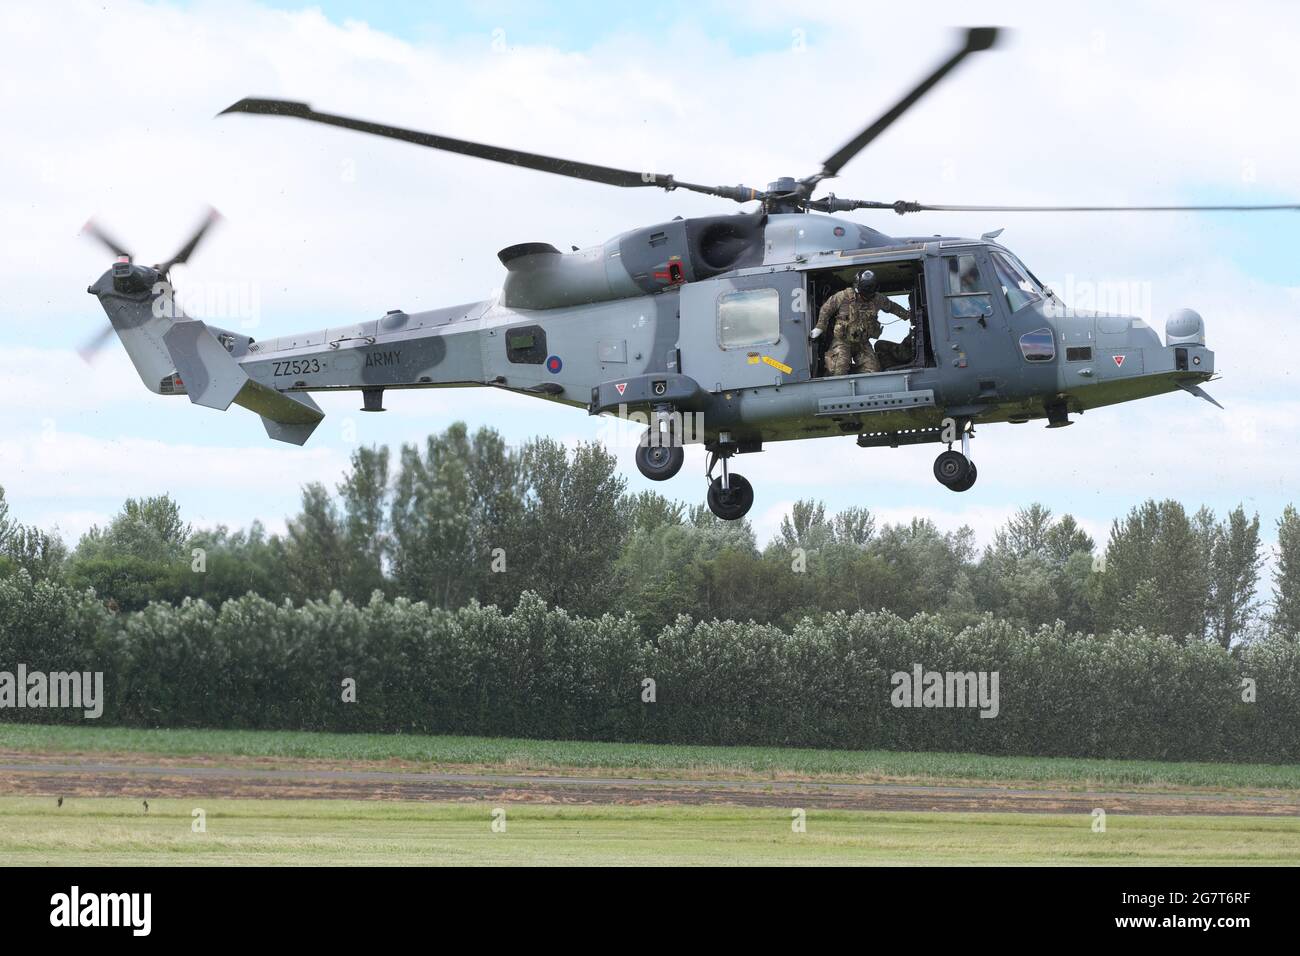 Army Air Corps AgustaWestland Wildcat AH1 helicopter coming into land at a training range in UK July 2021 Stock Photo